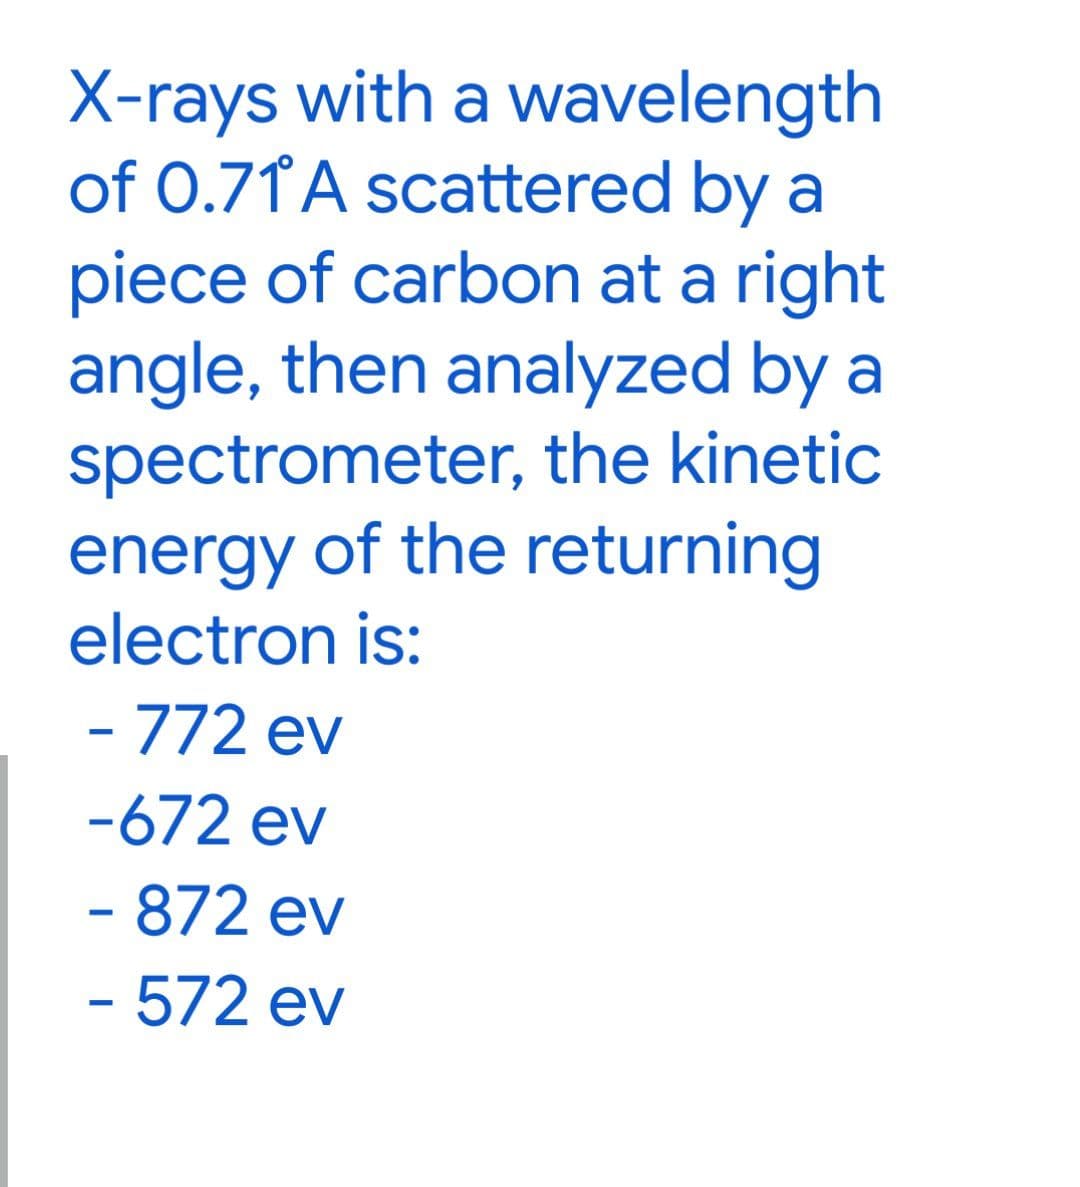 X-rays with a wavelength
of 0.71° A scattered by a
piece of carbon at a right
angle, then analyzed by a
spectrometer, the kinetic
energy of the returning
electron is:
- 772 ev
-672 ev
- 872 ev
- 572 ev